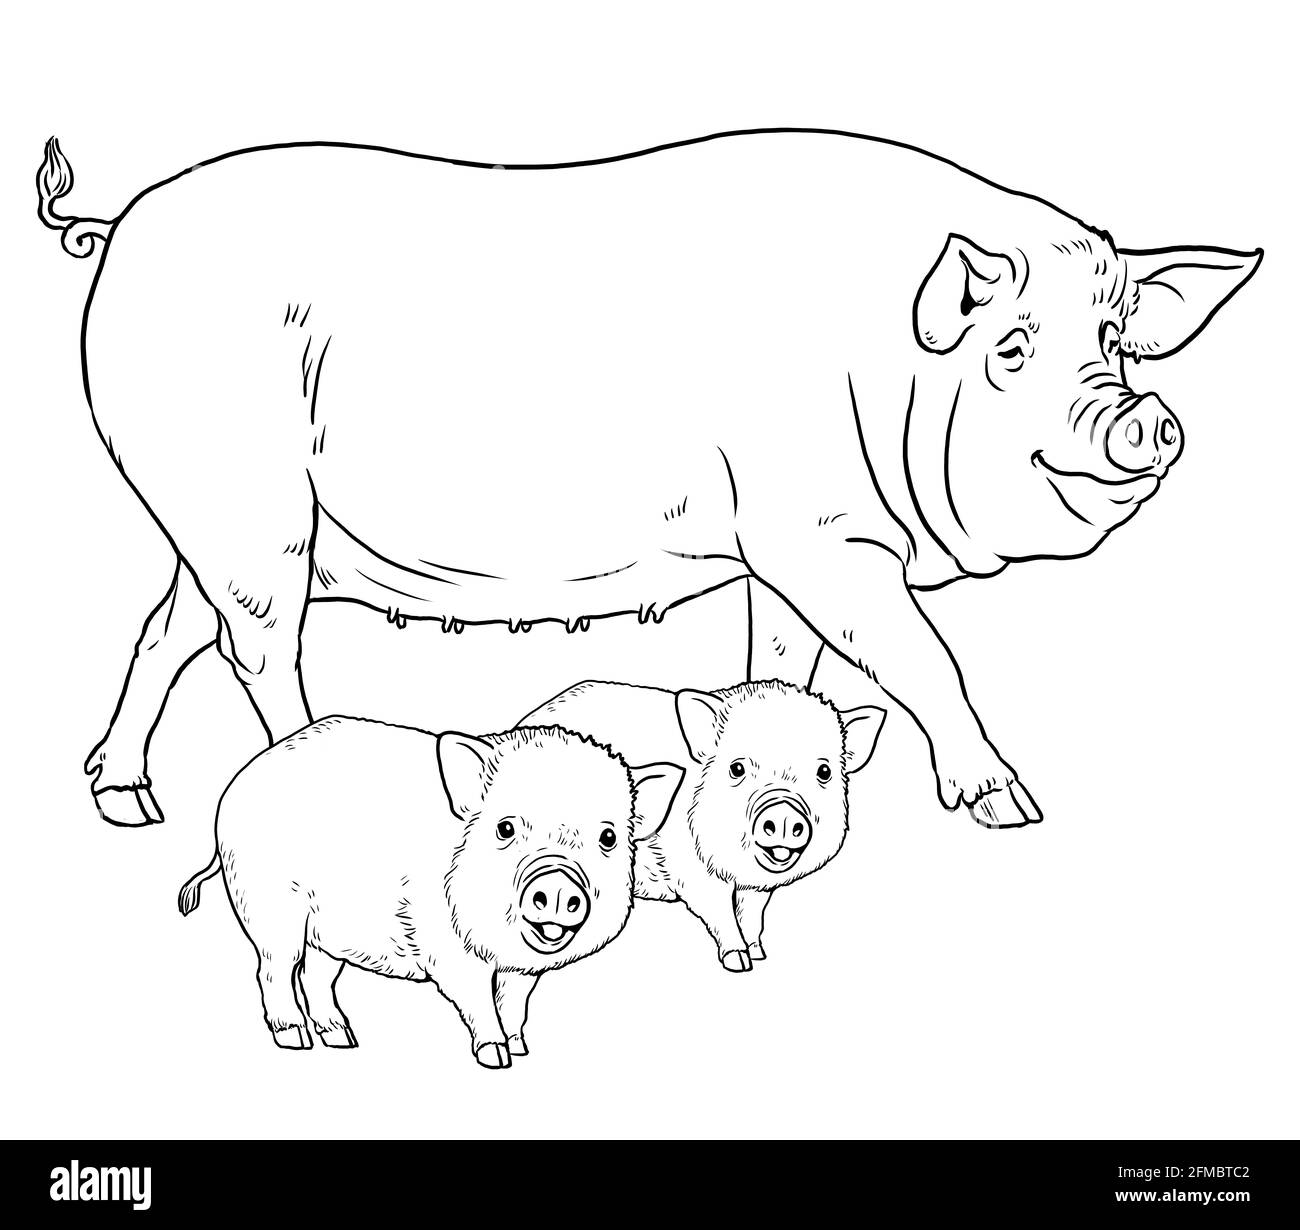 Coloring page with the animals. Pig with piglets for coloring. Digital drawing. Stock Photo